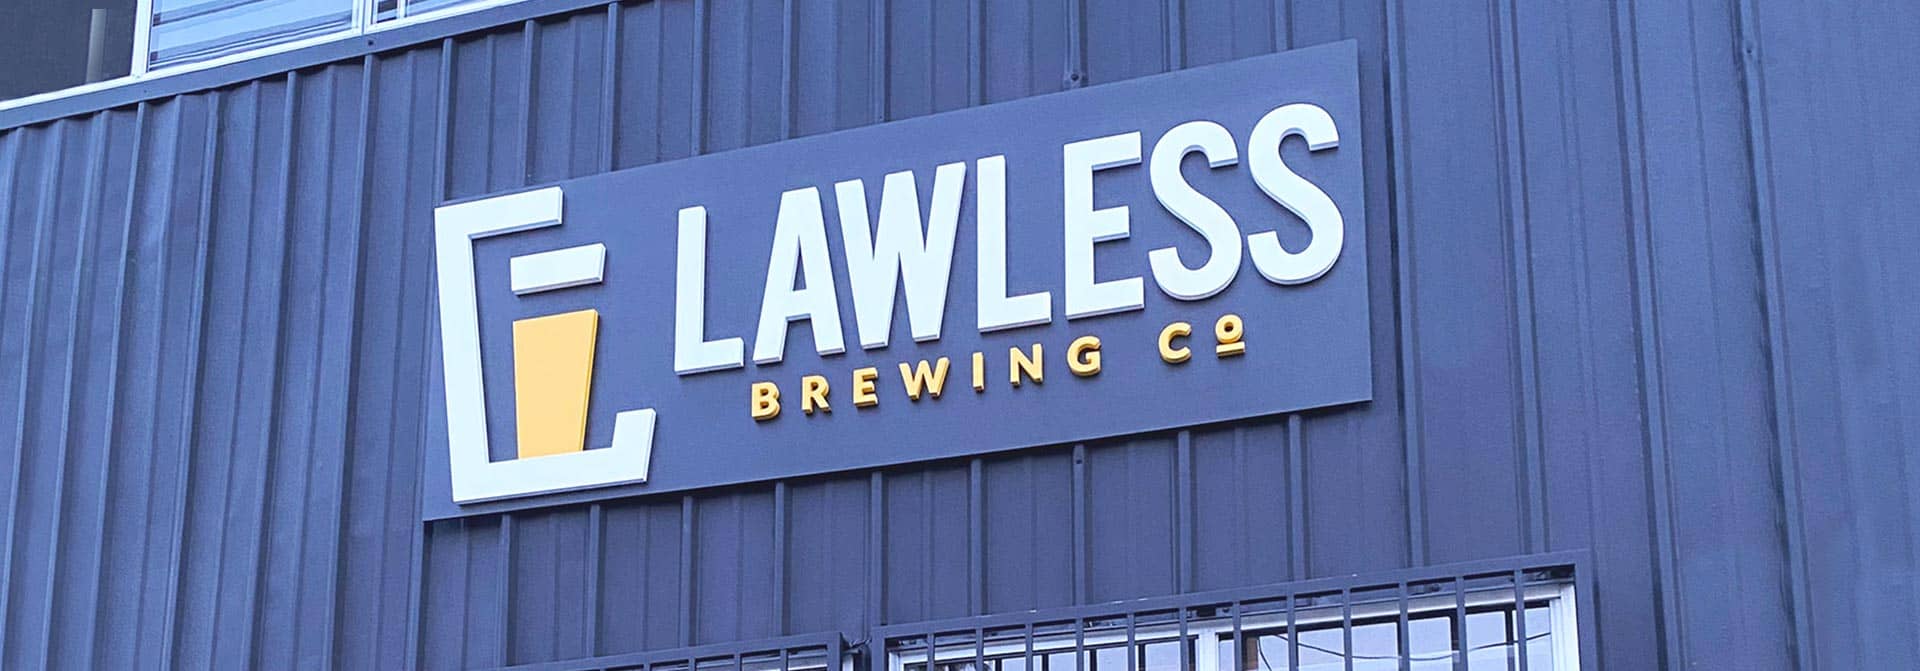 Brewery branding solutions for Lawless Brewing Co.